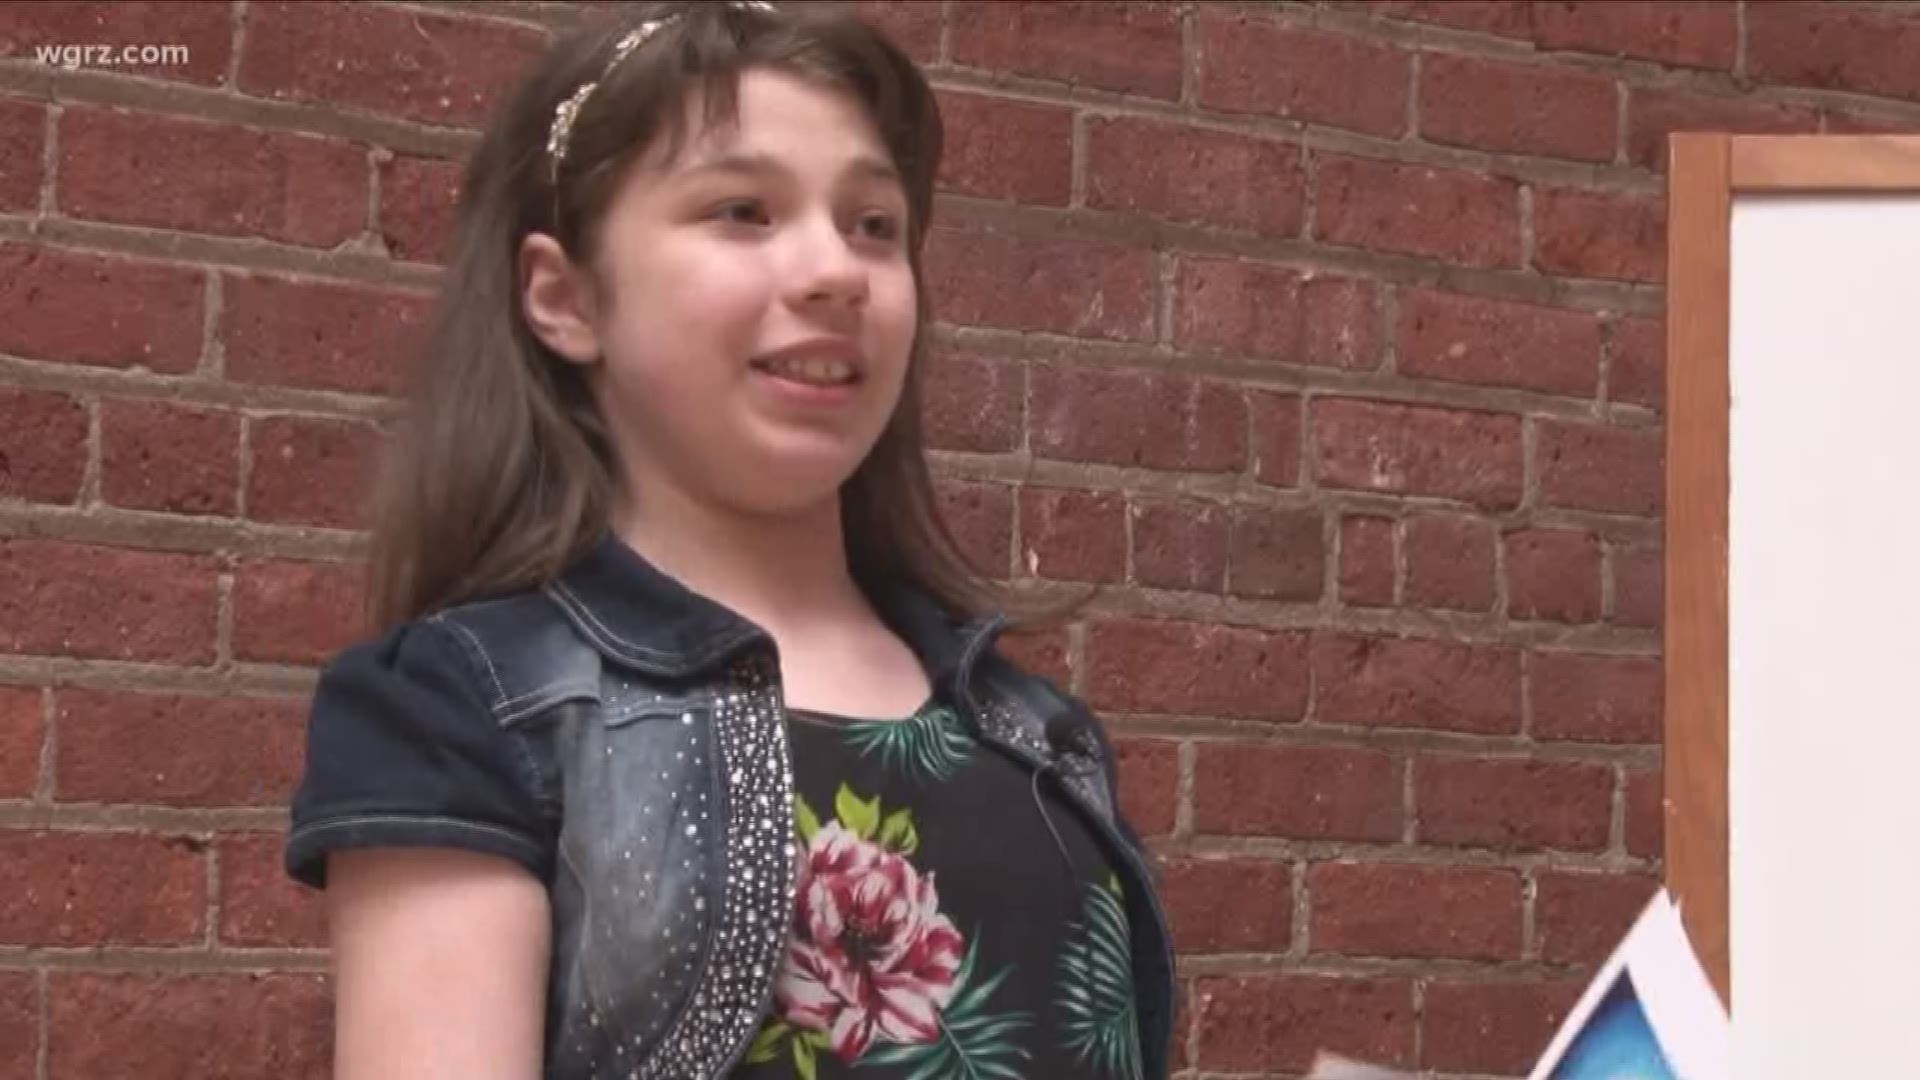 Art helps 12-year-old girl find her voice